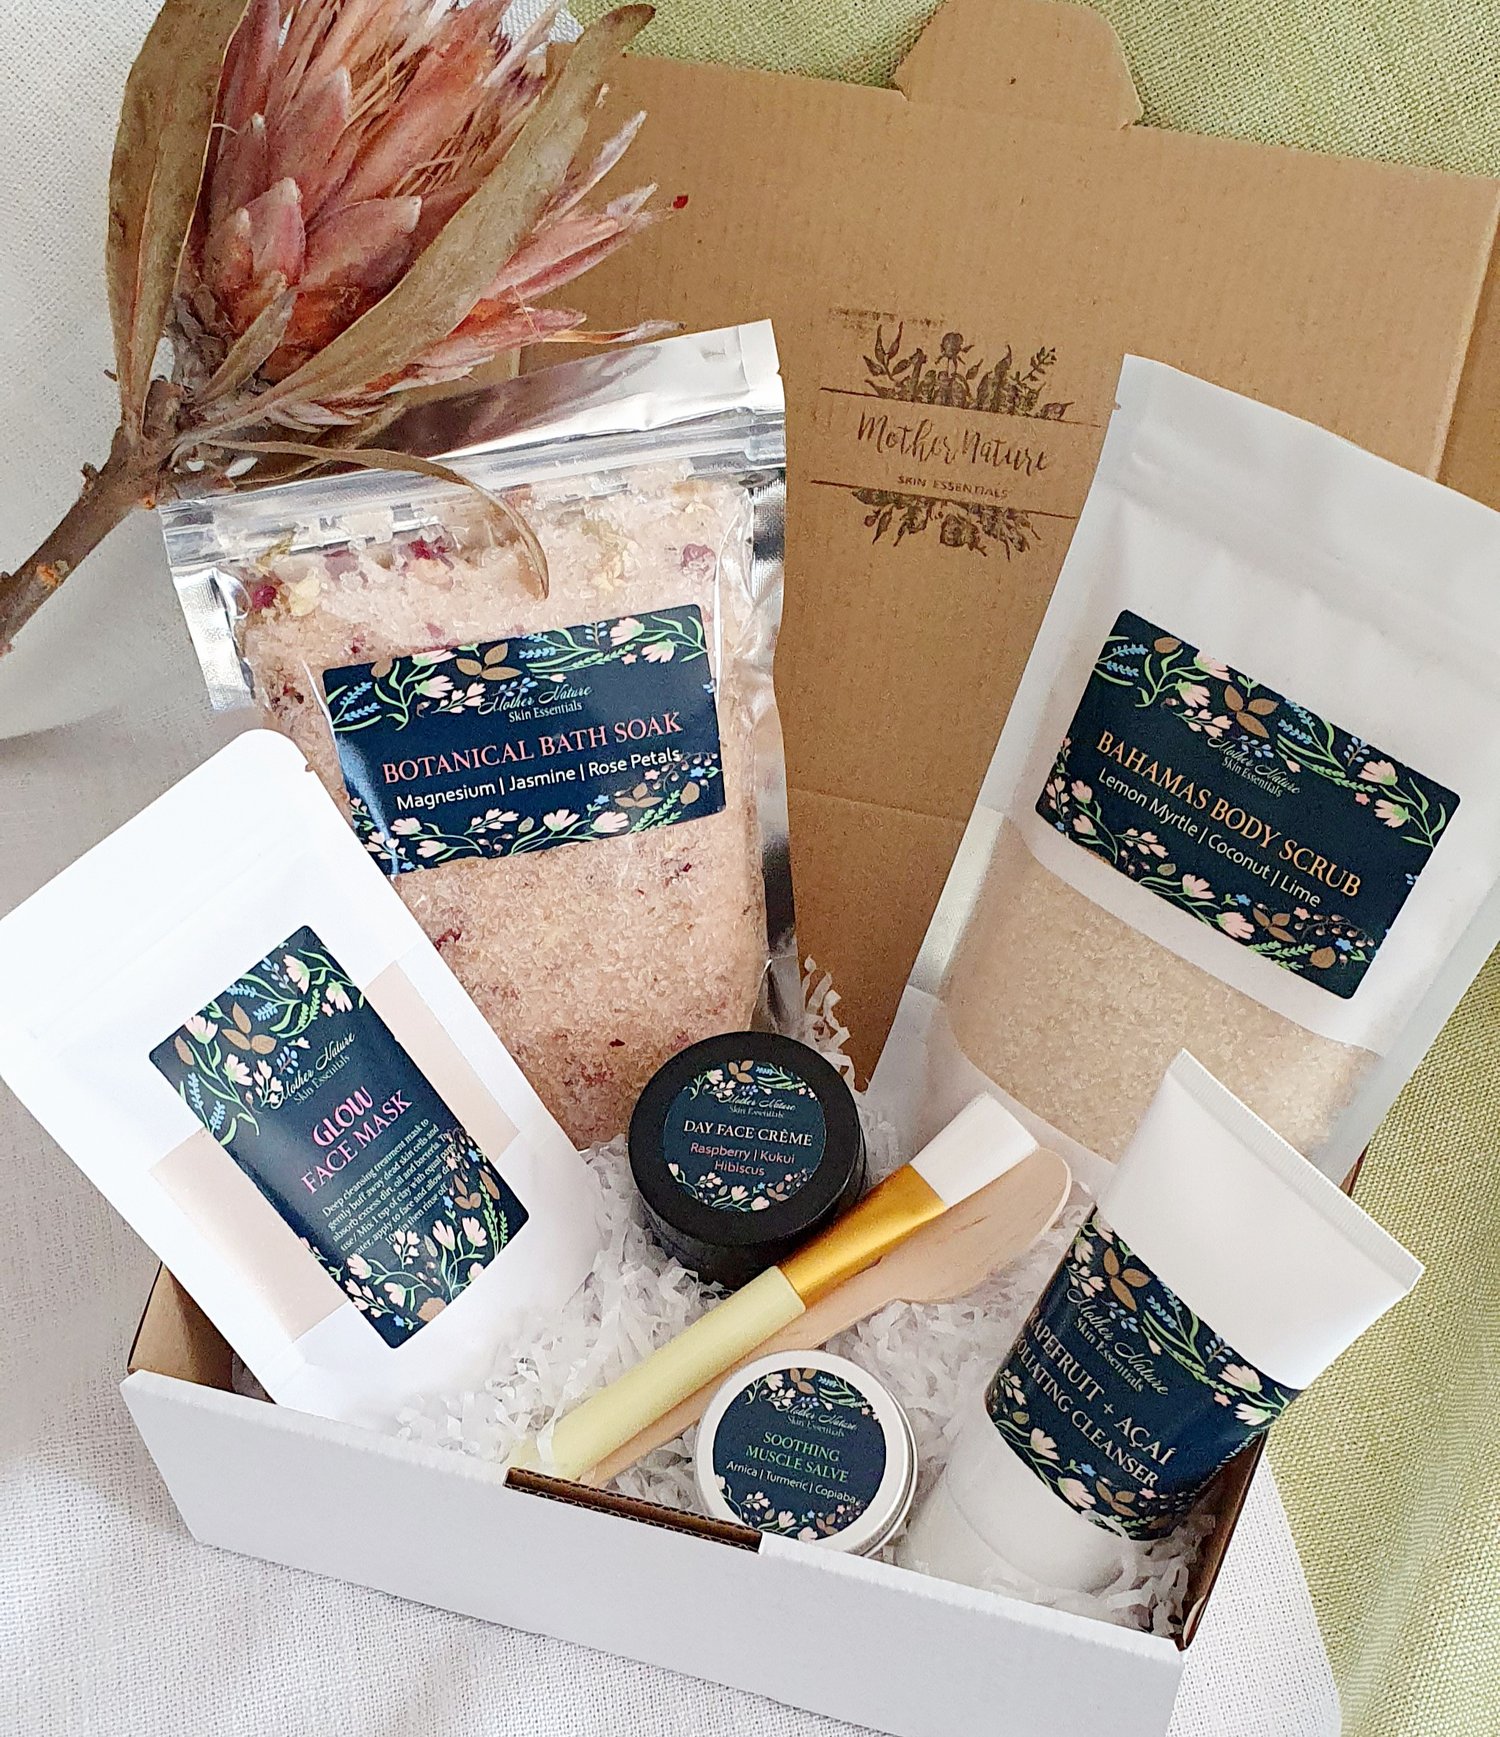 Image of Body & Soul Self-care Ritual Gift Box | Natural Tox free Skin and Body Care